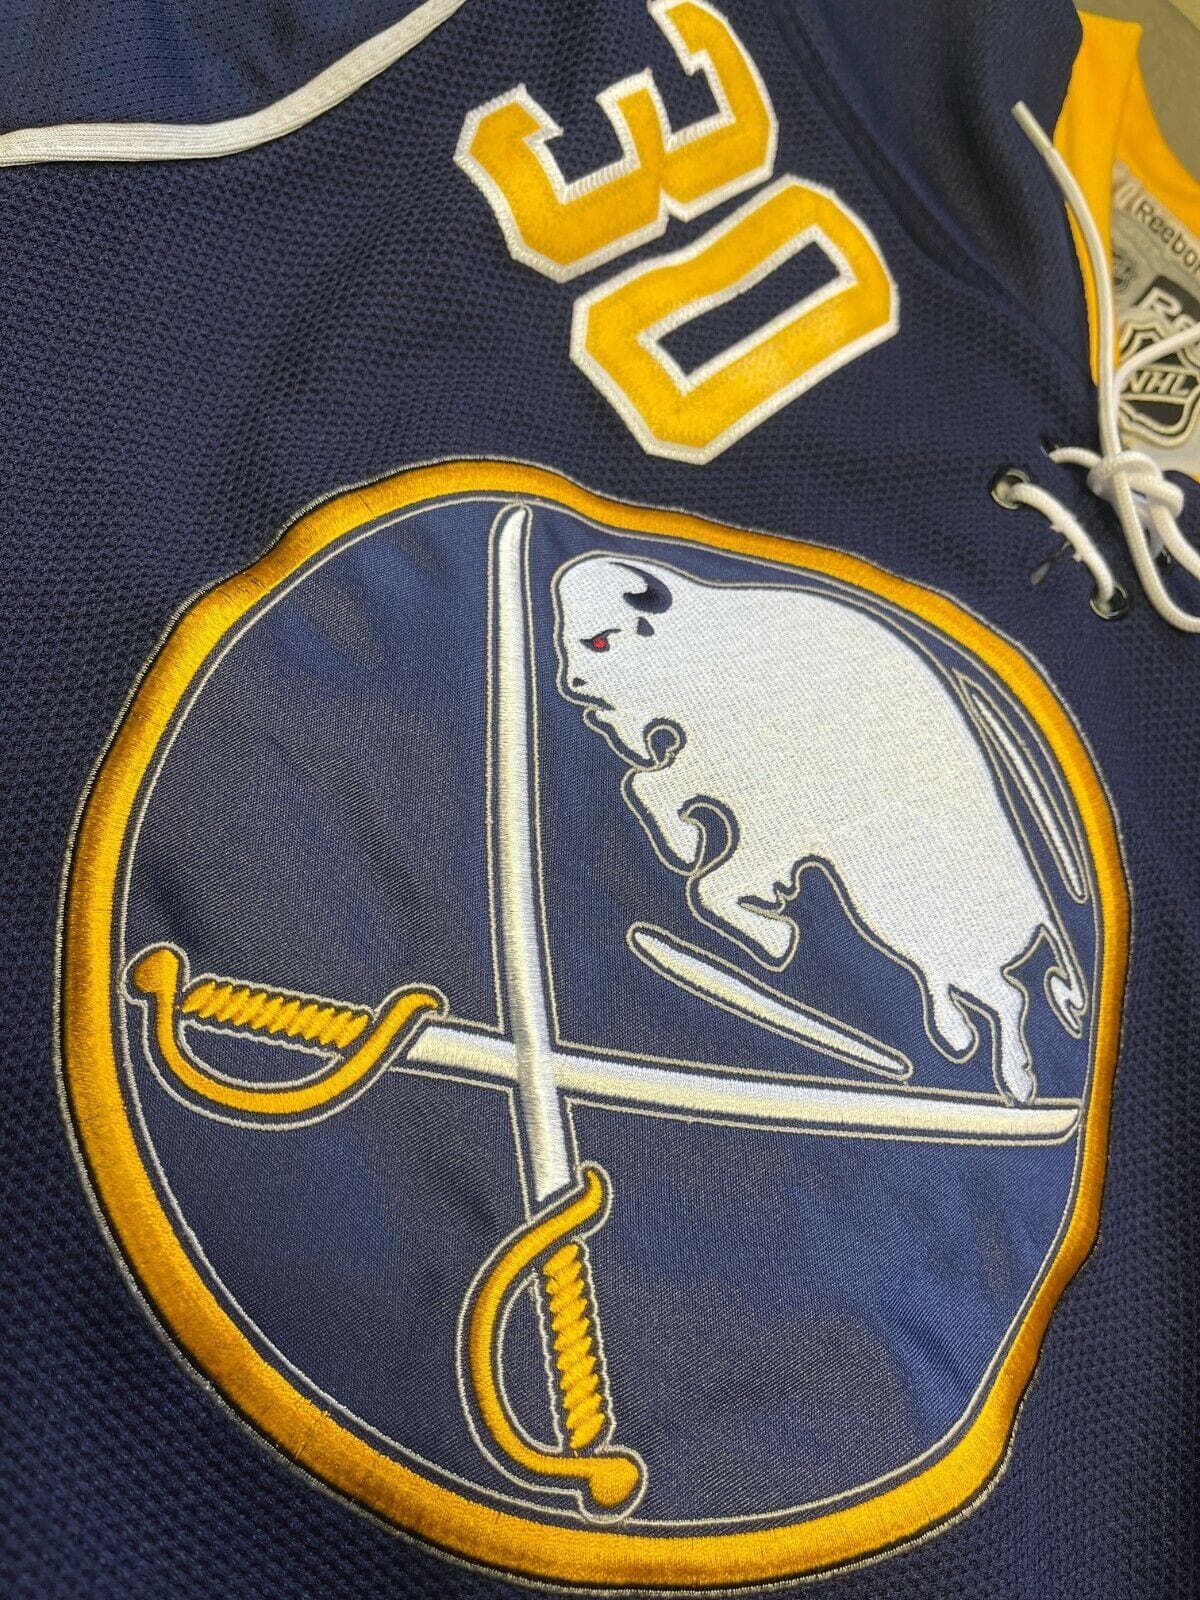 NHL Buffalo Sabres Miller #30 Reebok Stitched Jersey Youth S-M 6-12